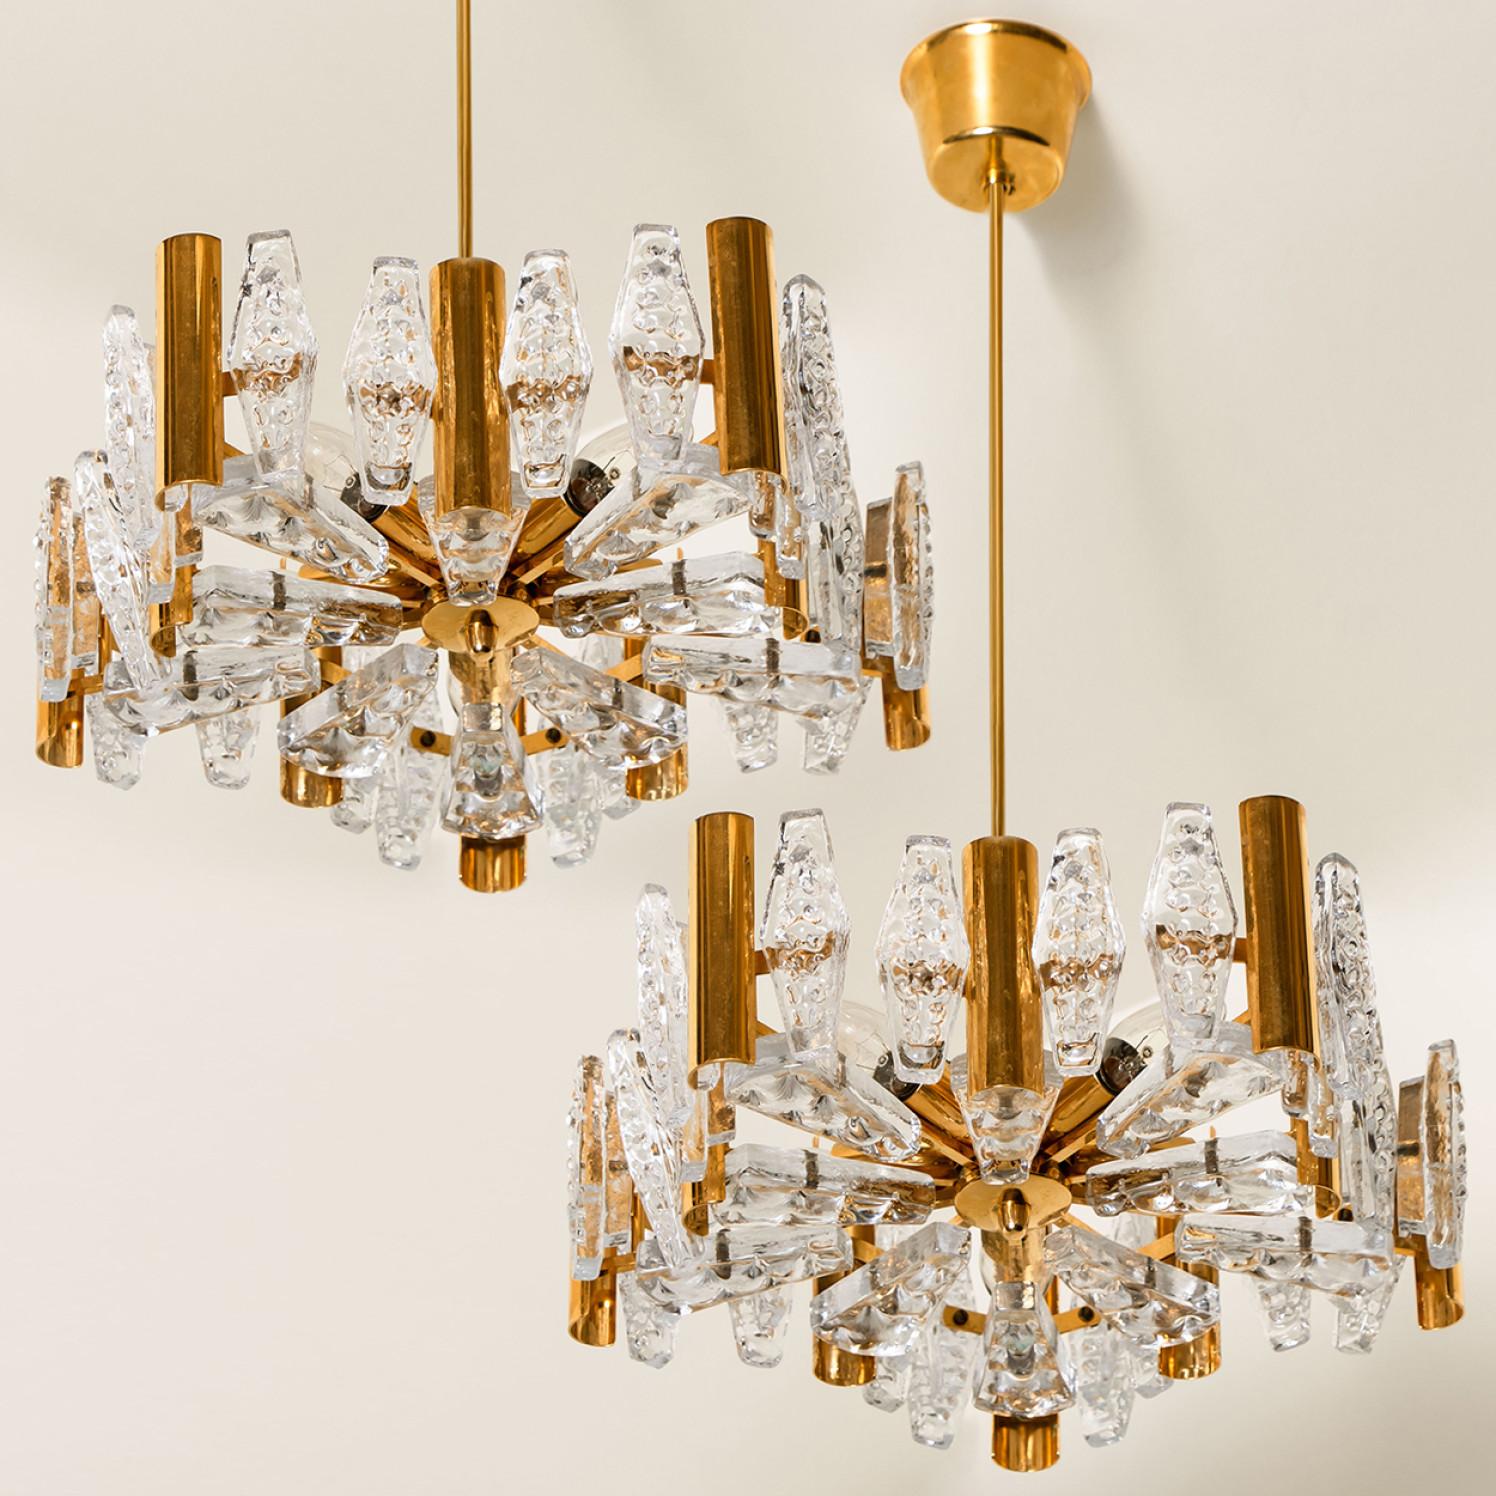 Mid-Century Modern 1 of the 2 Large Glass and Brass Chandelier by Orrefors, 1960s For Sale